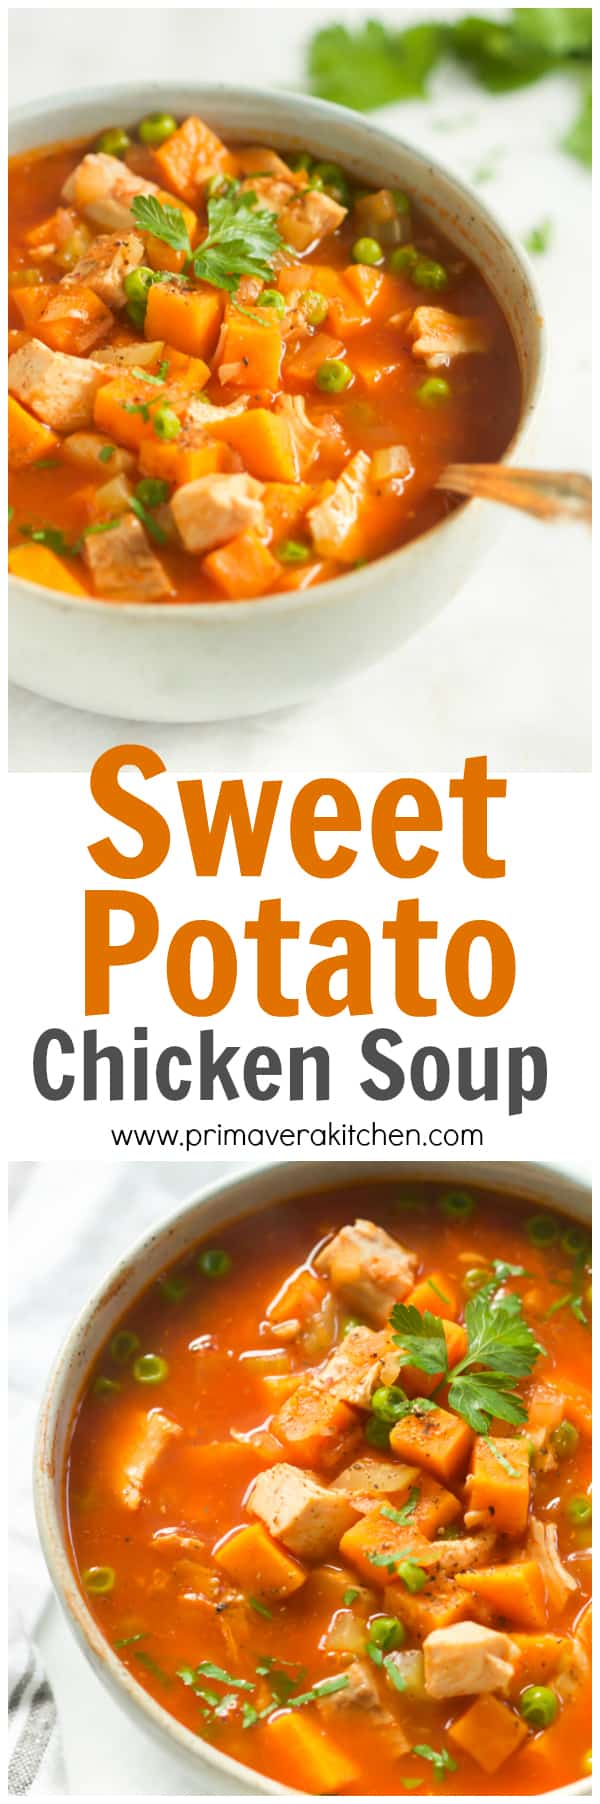 This hearty, healthy and comforting Sweet Potato Chicken Soup is made in less than 30 minutes. It’s low-carb, gluten-free and paleo-friendly too. | www.primaverakitchen.com